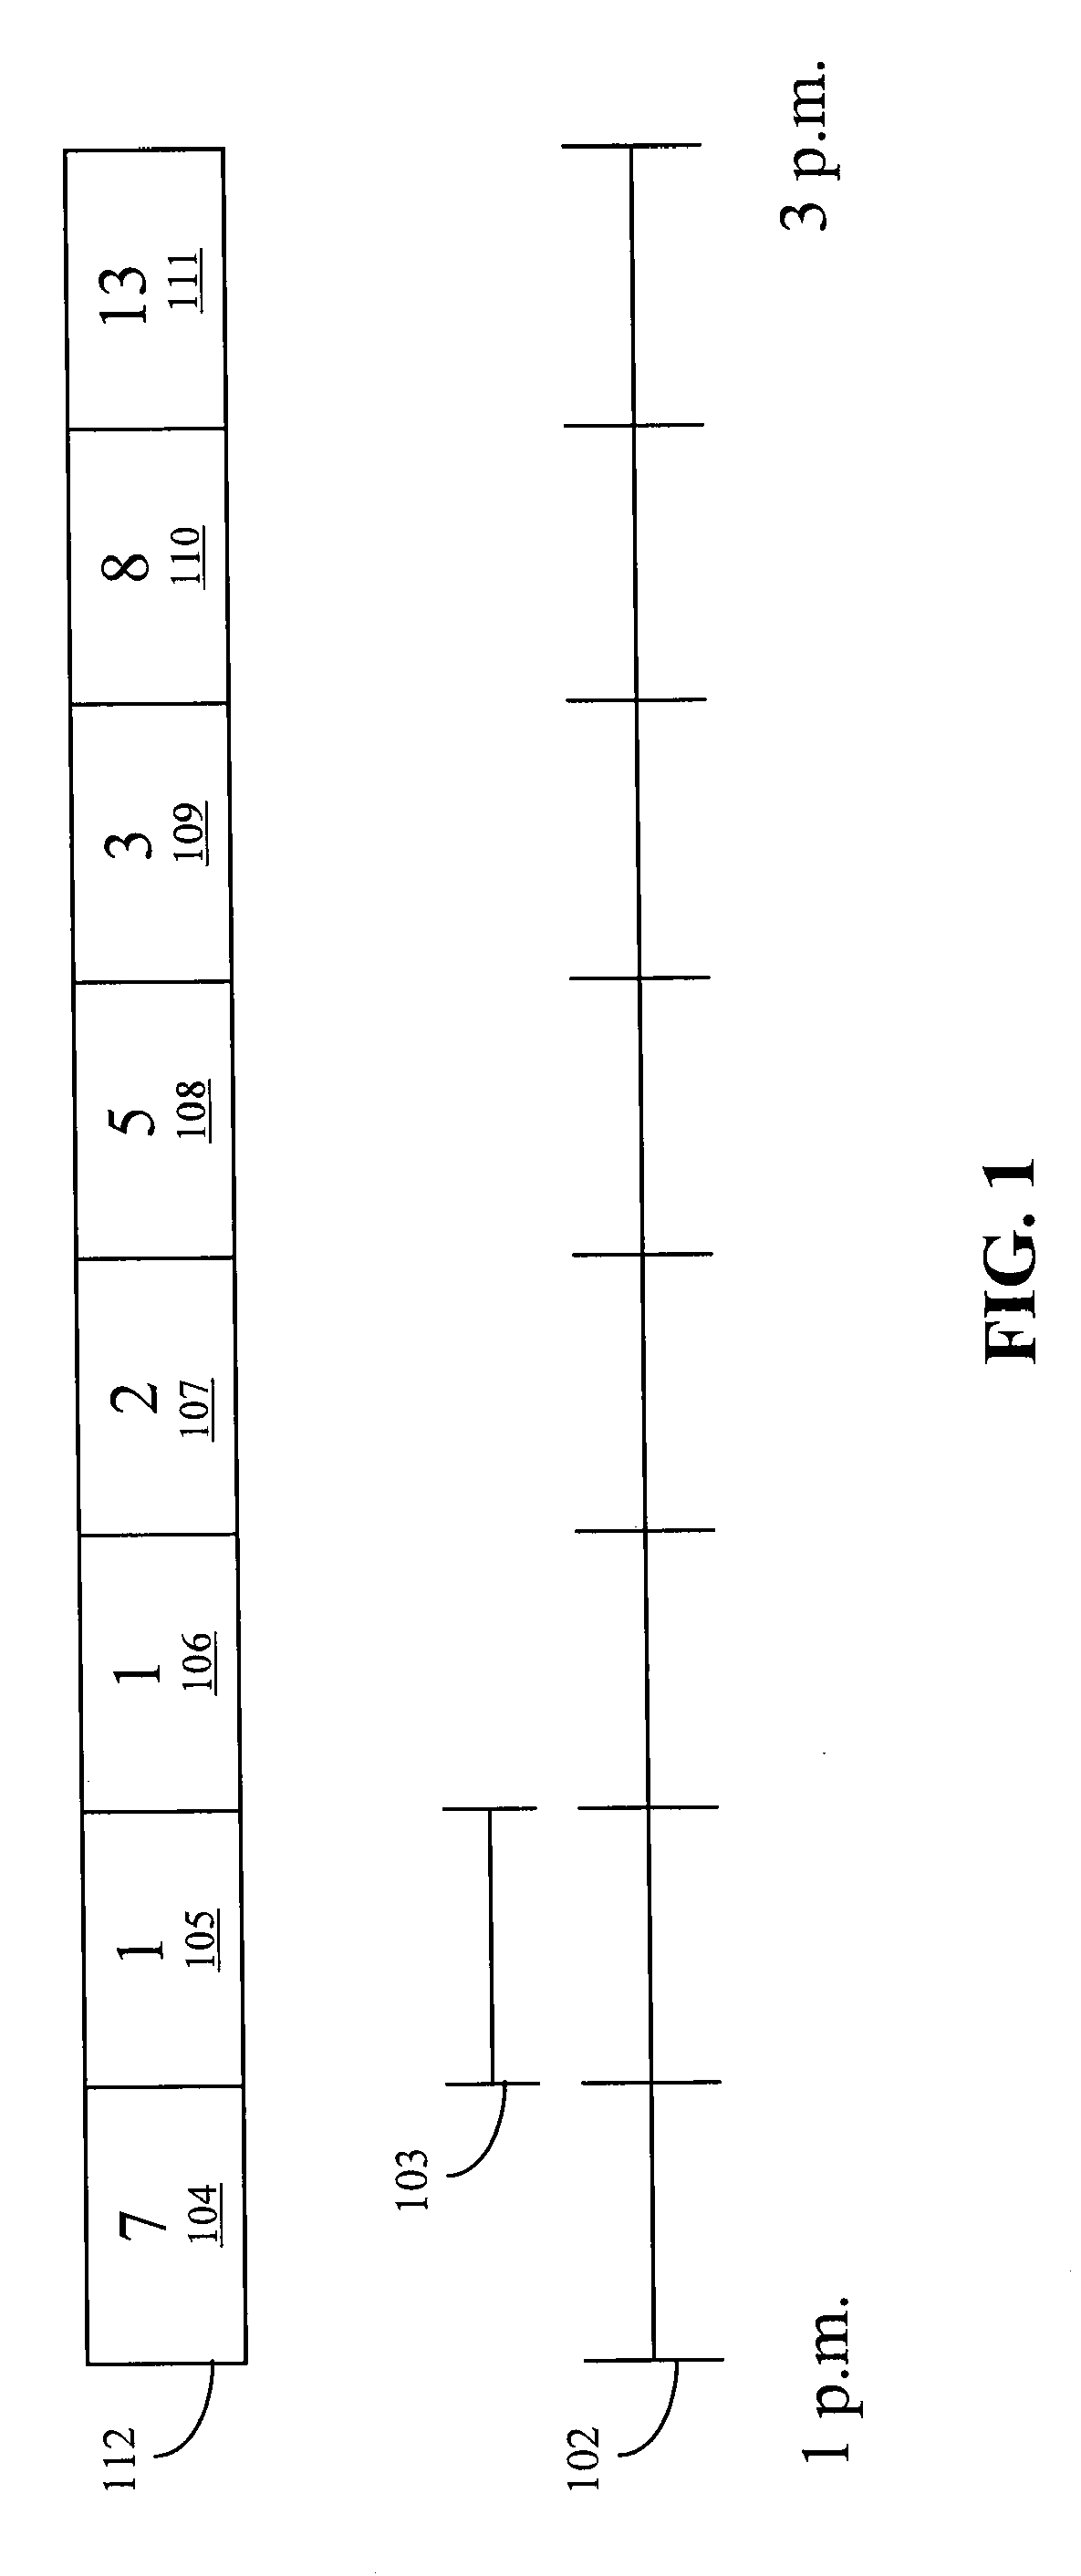 Efficient storage of data allowing for multiple level granularity retrieval